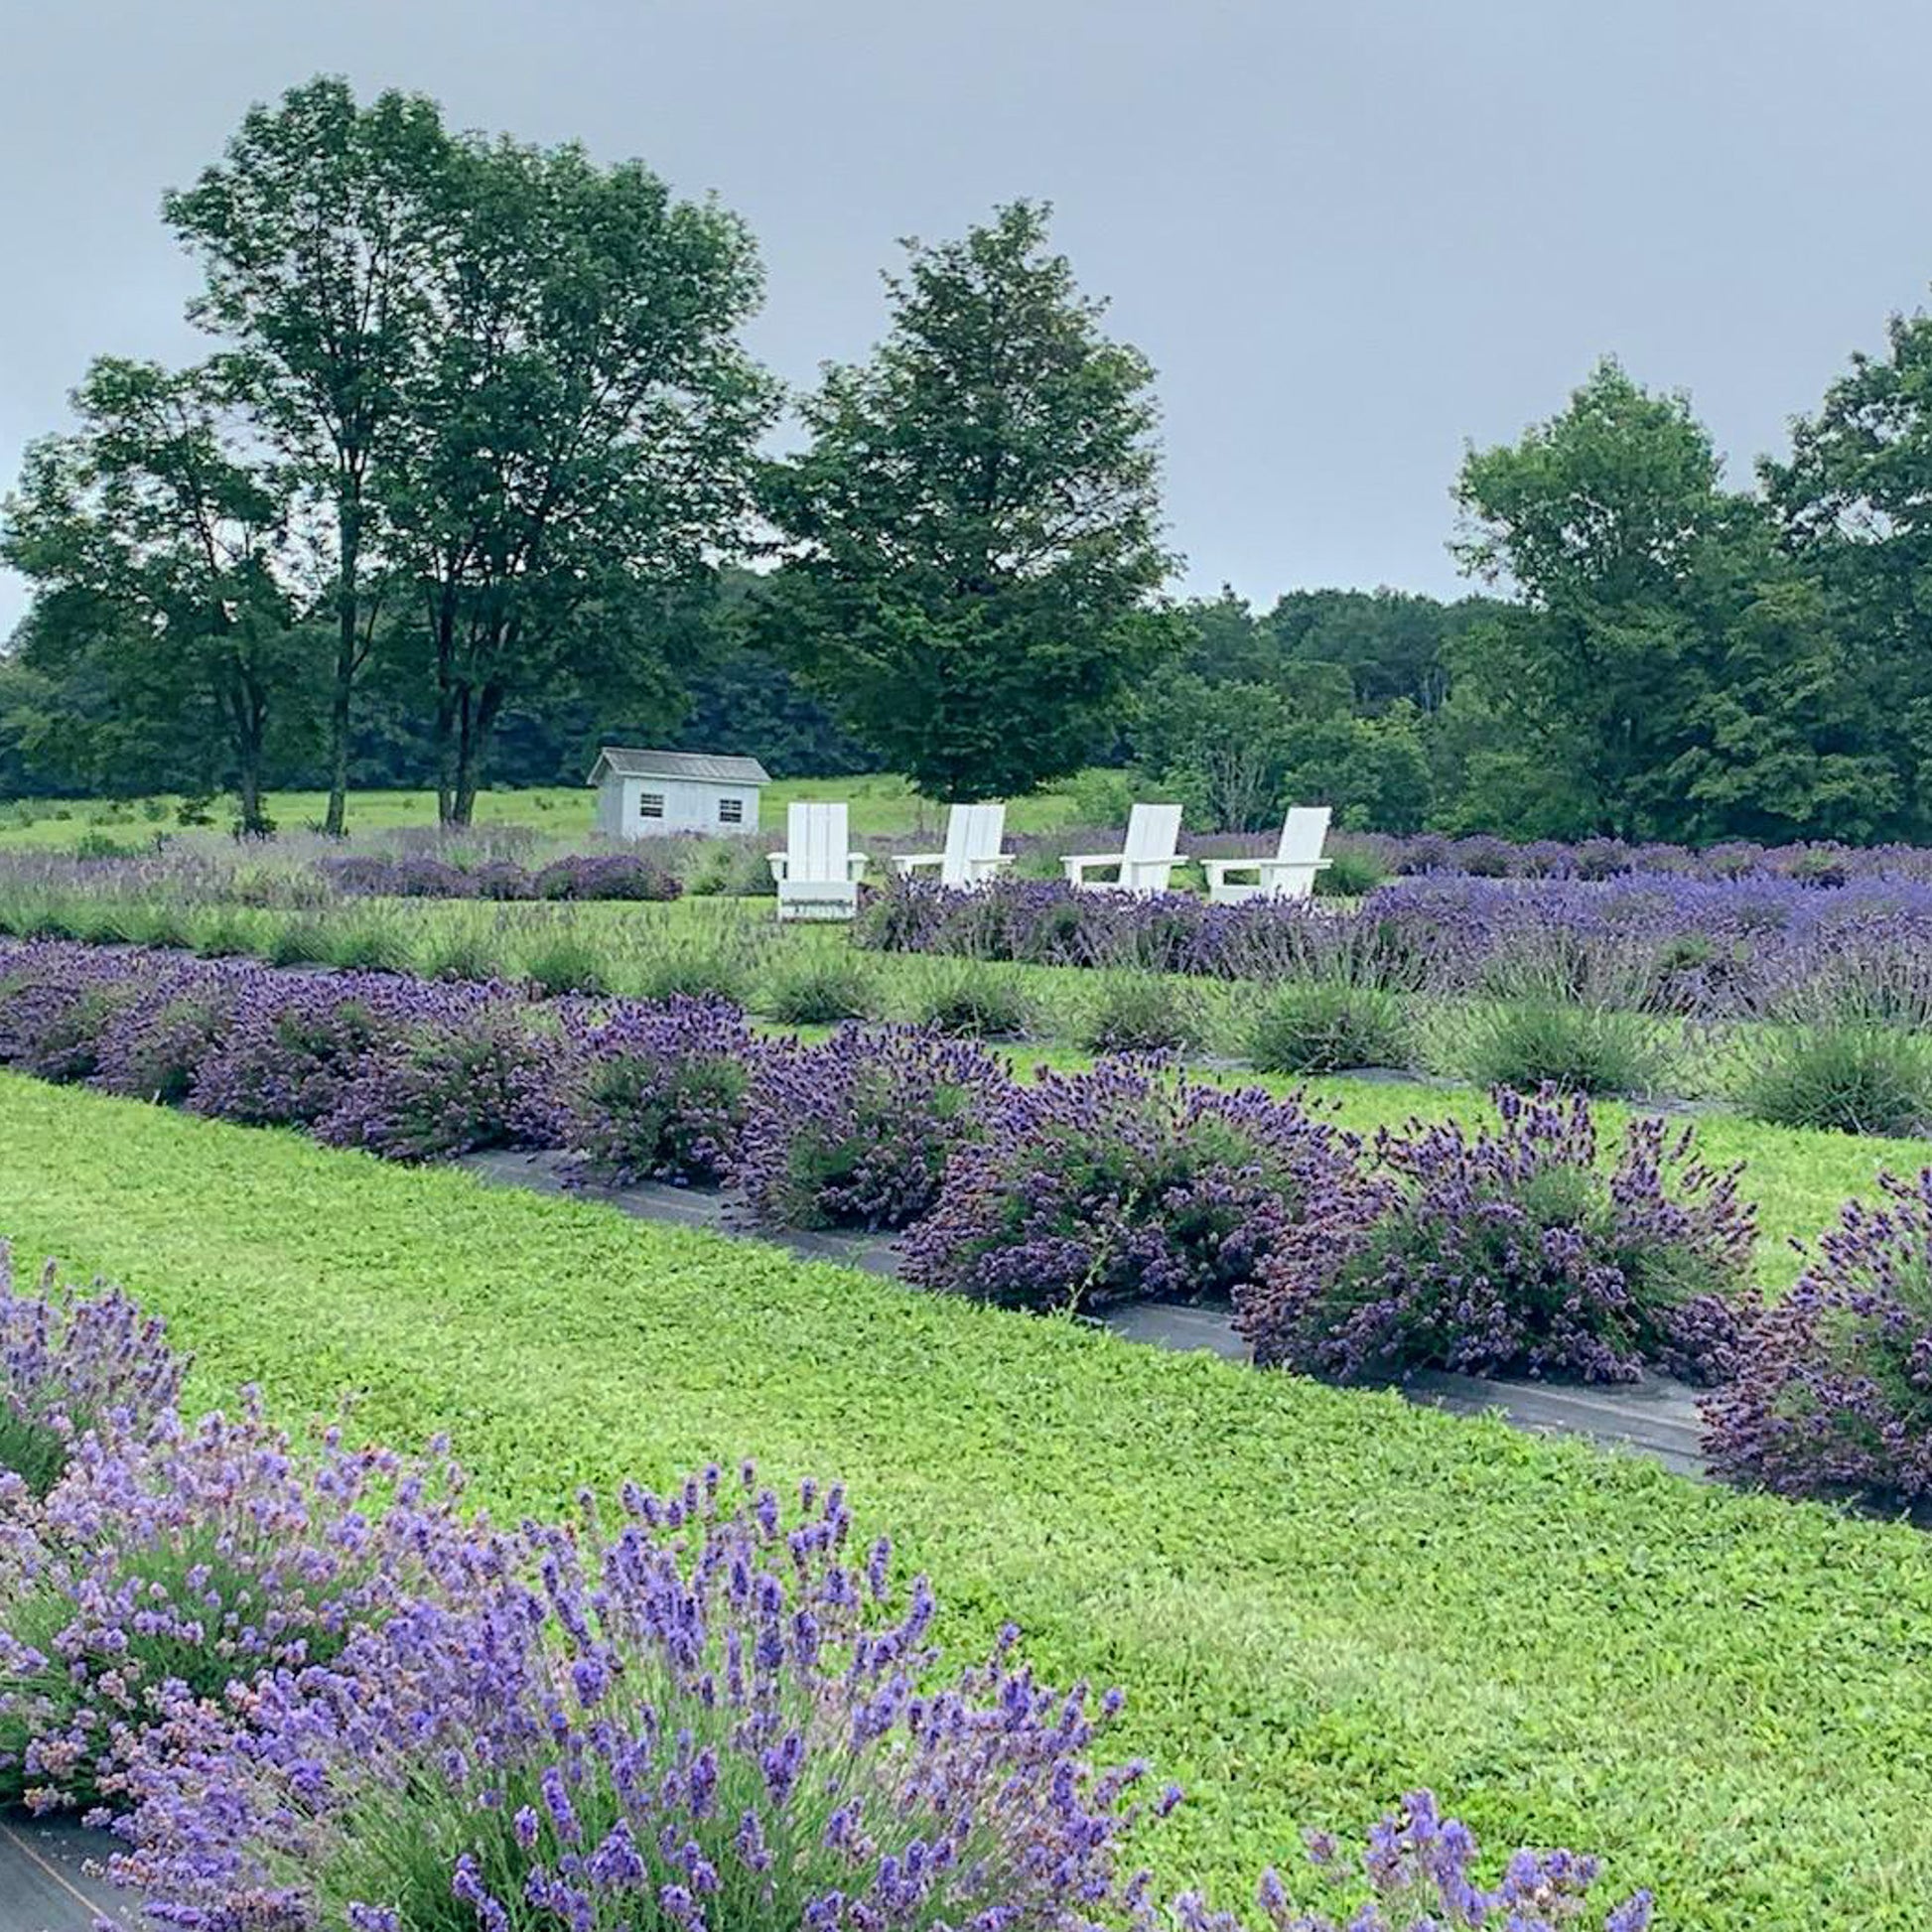 Lavender field with white adirondack chairs.